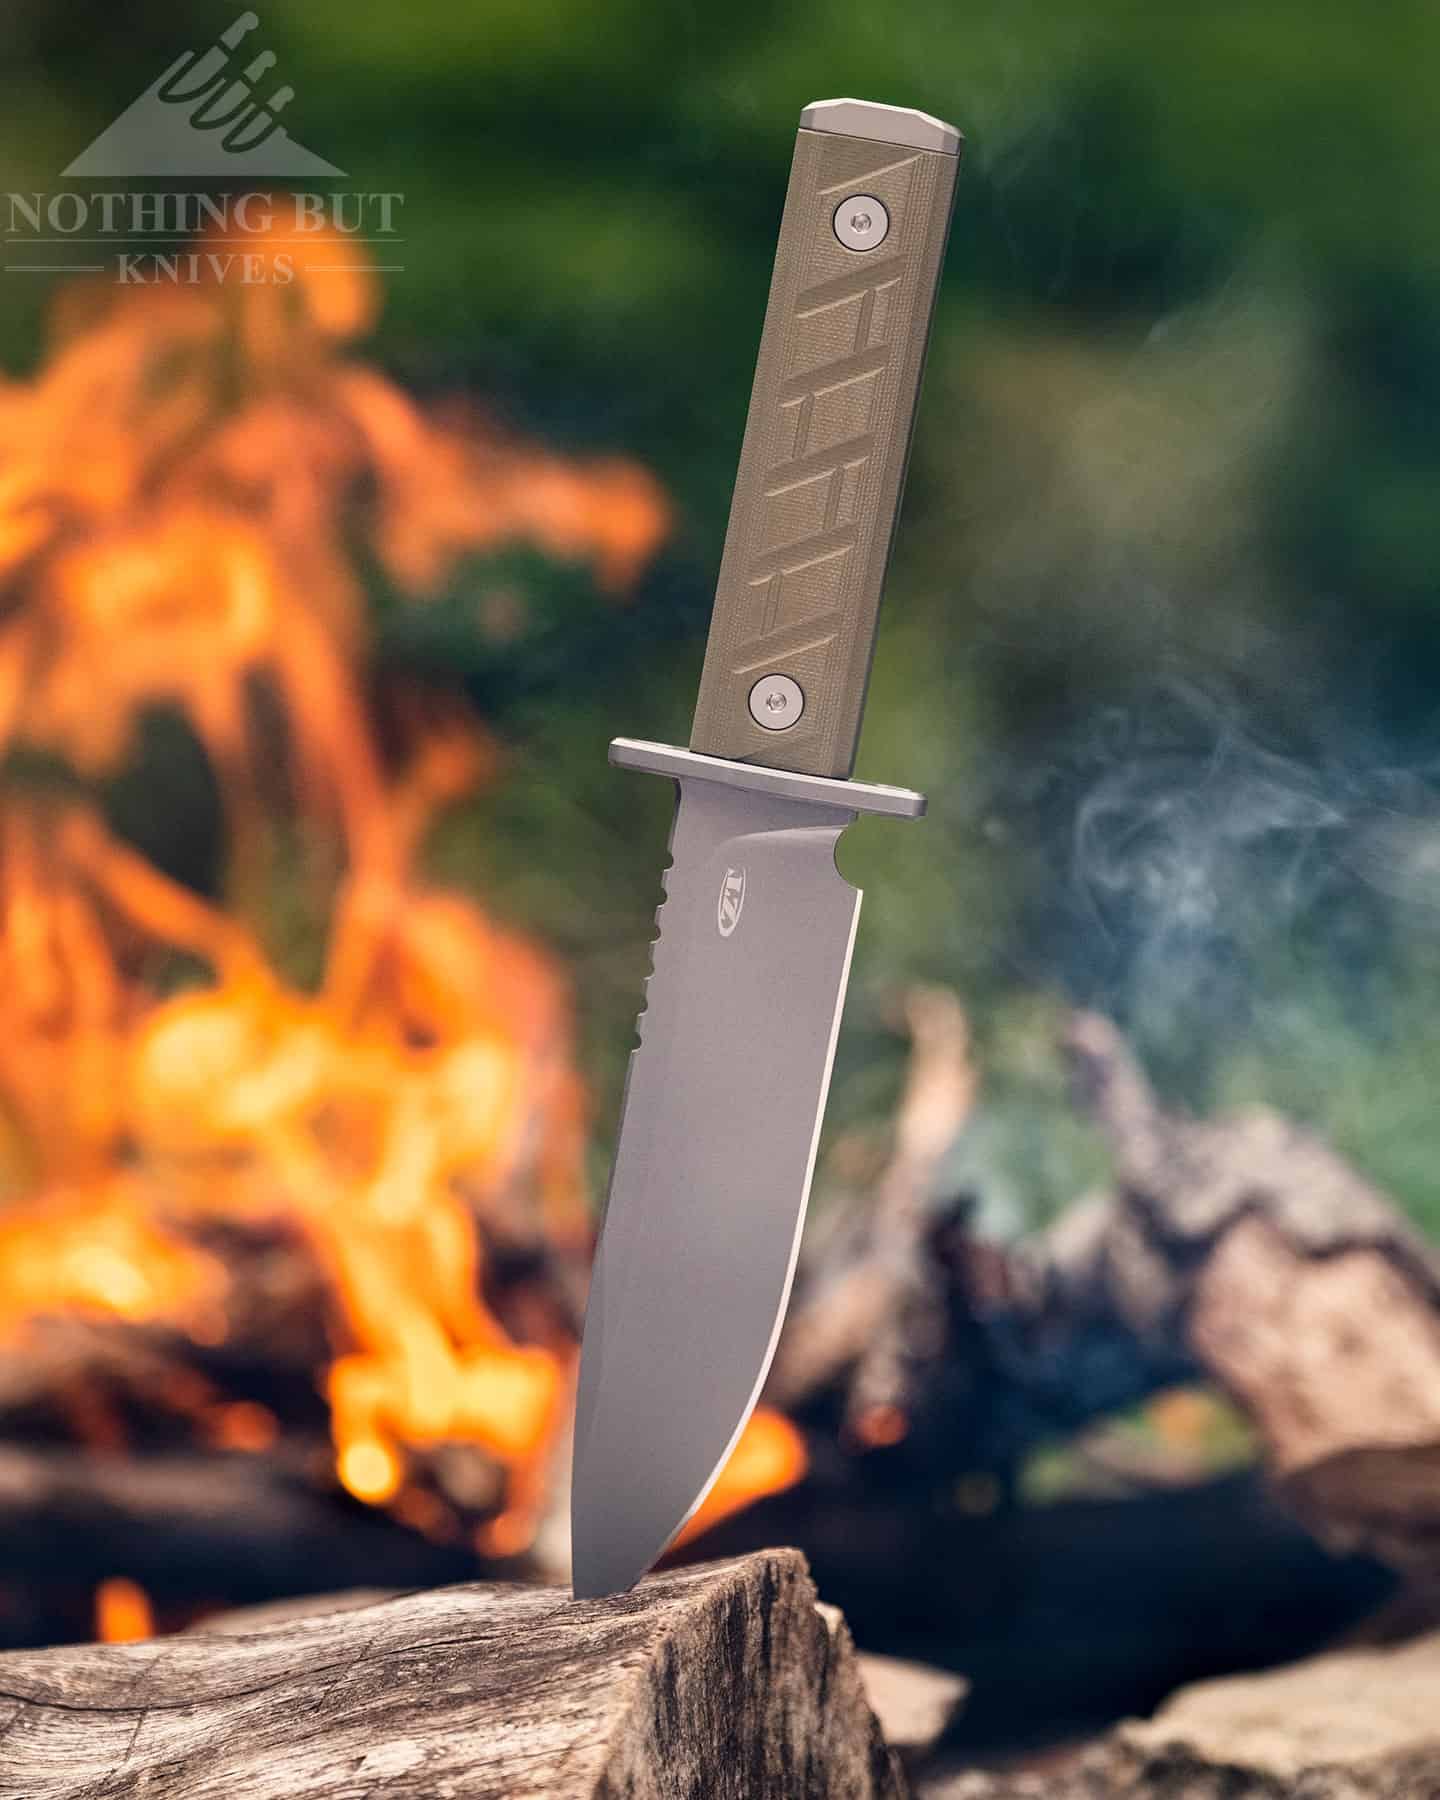 Camping with the Zero Tolerance 0006 is fun.